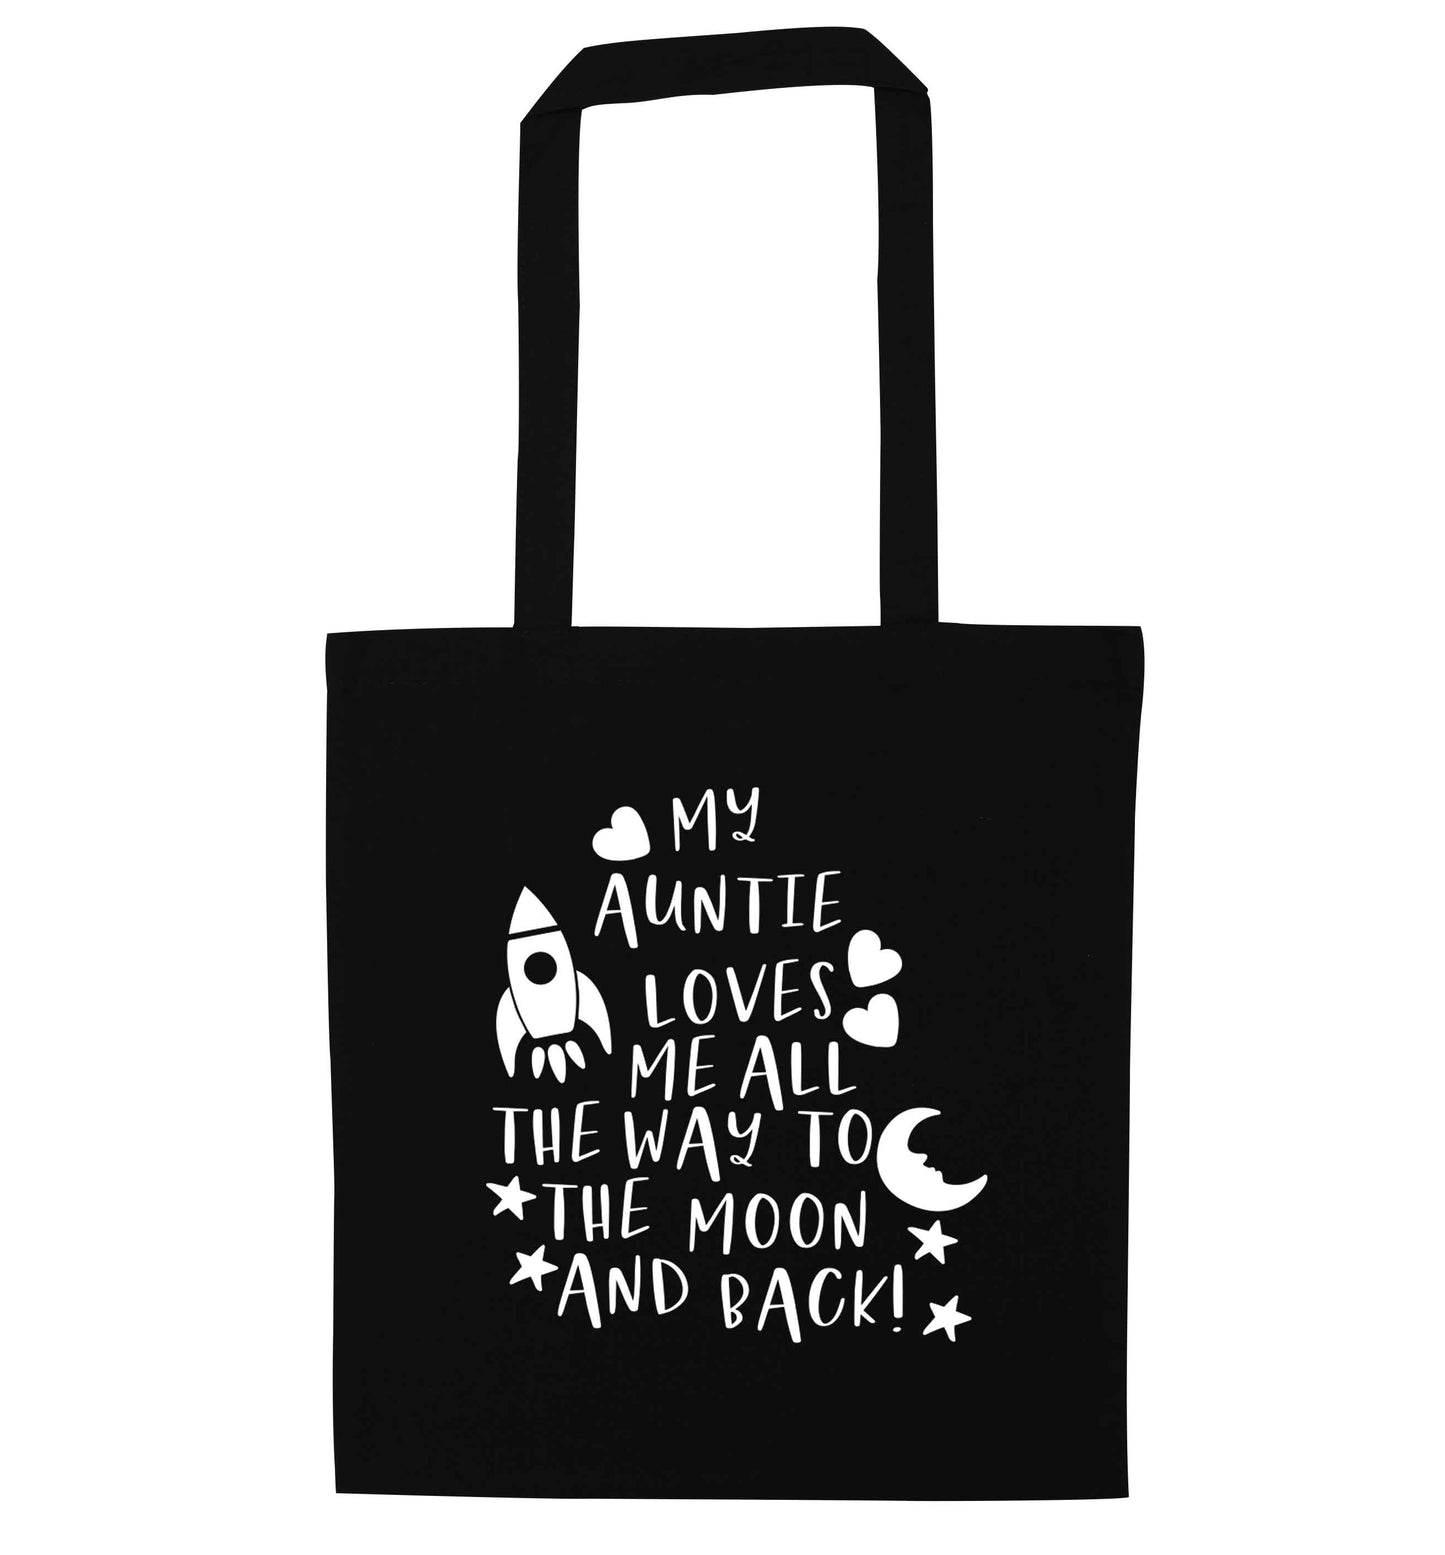 My auntie loves me all the way to the moon and back black tote bag